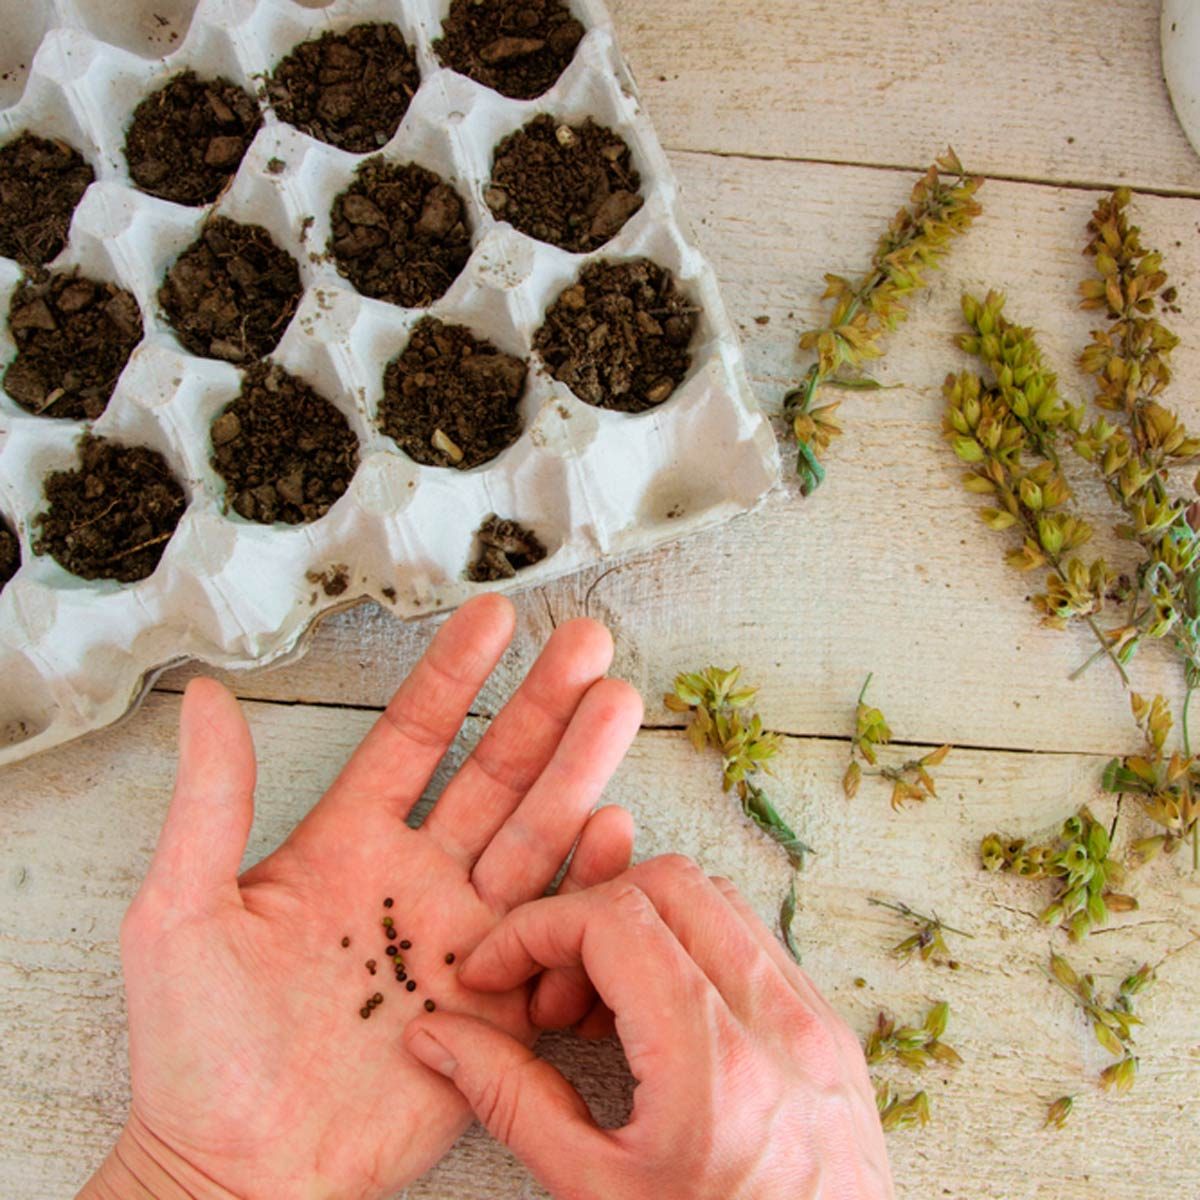 10 Tips for Growing Plants From Seed